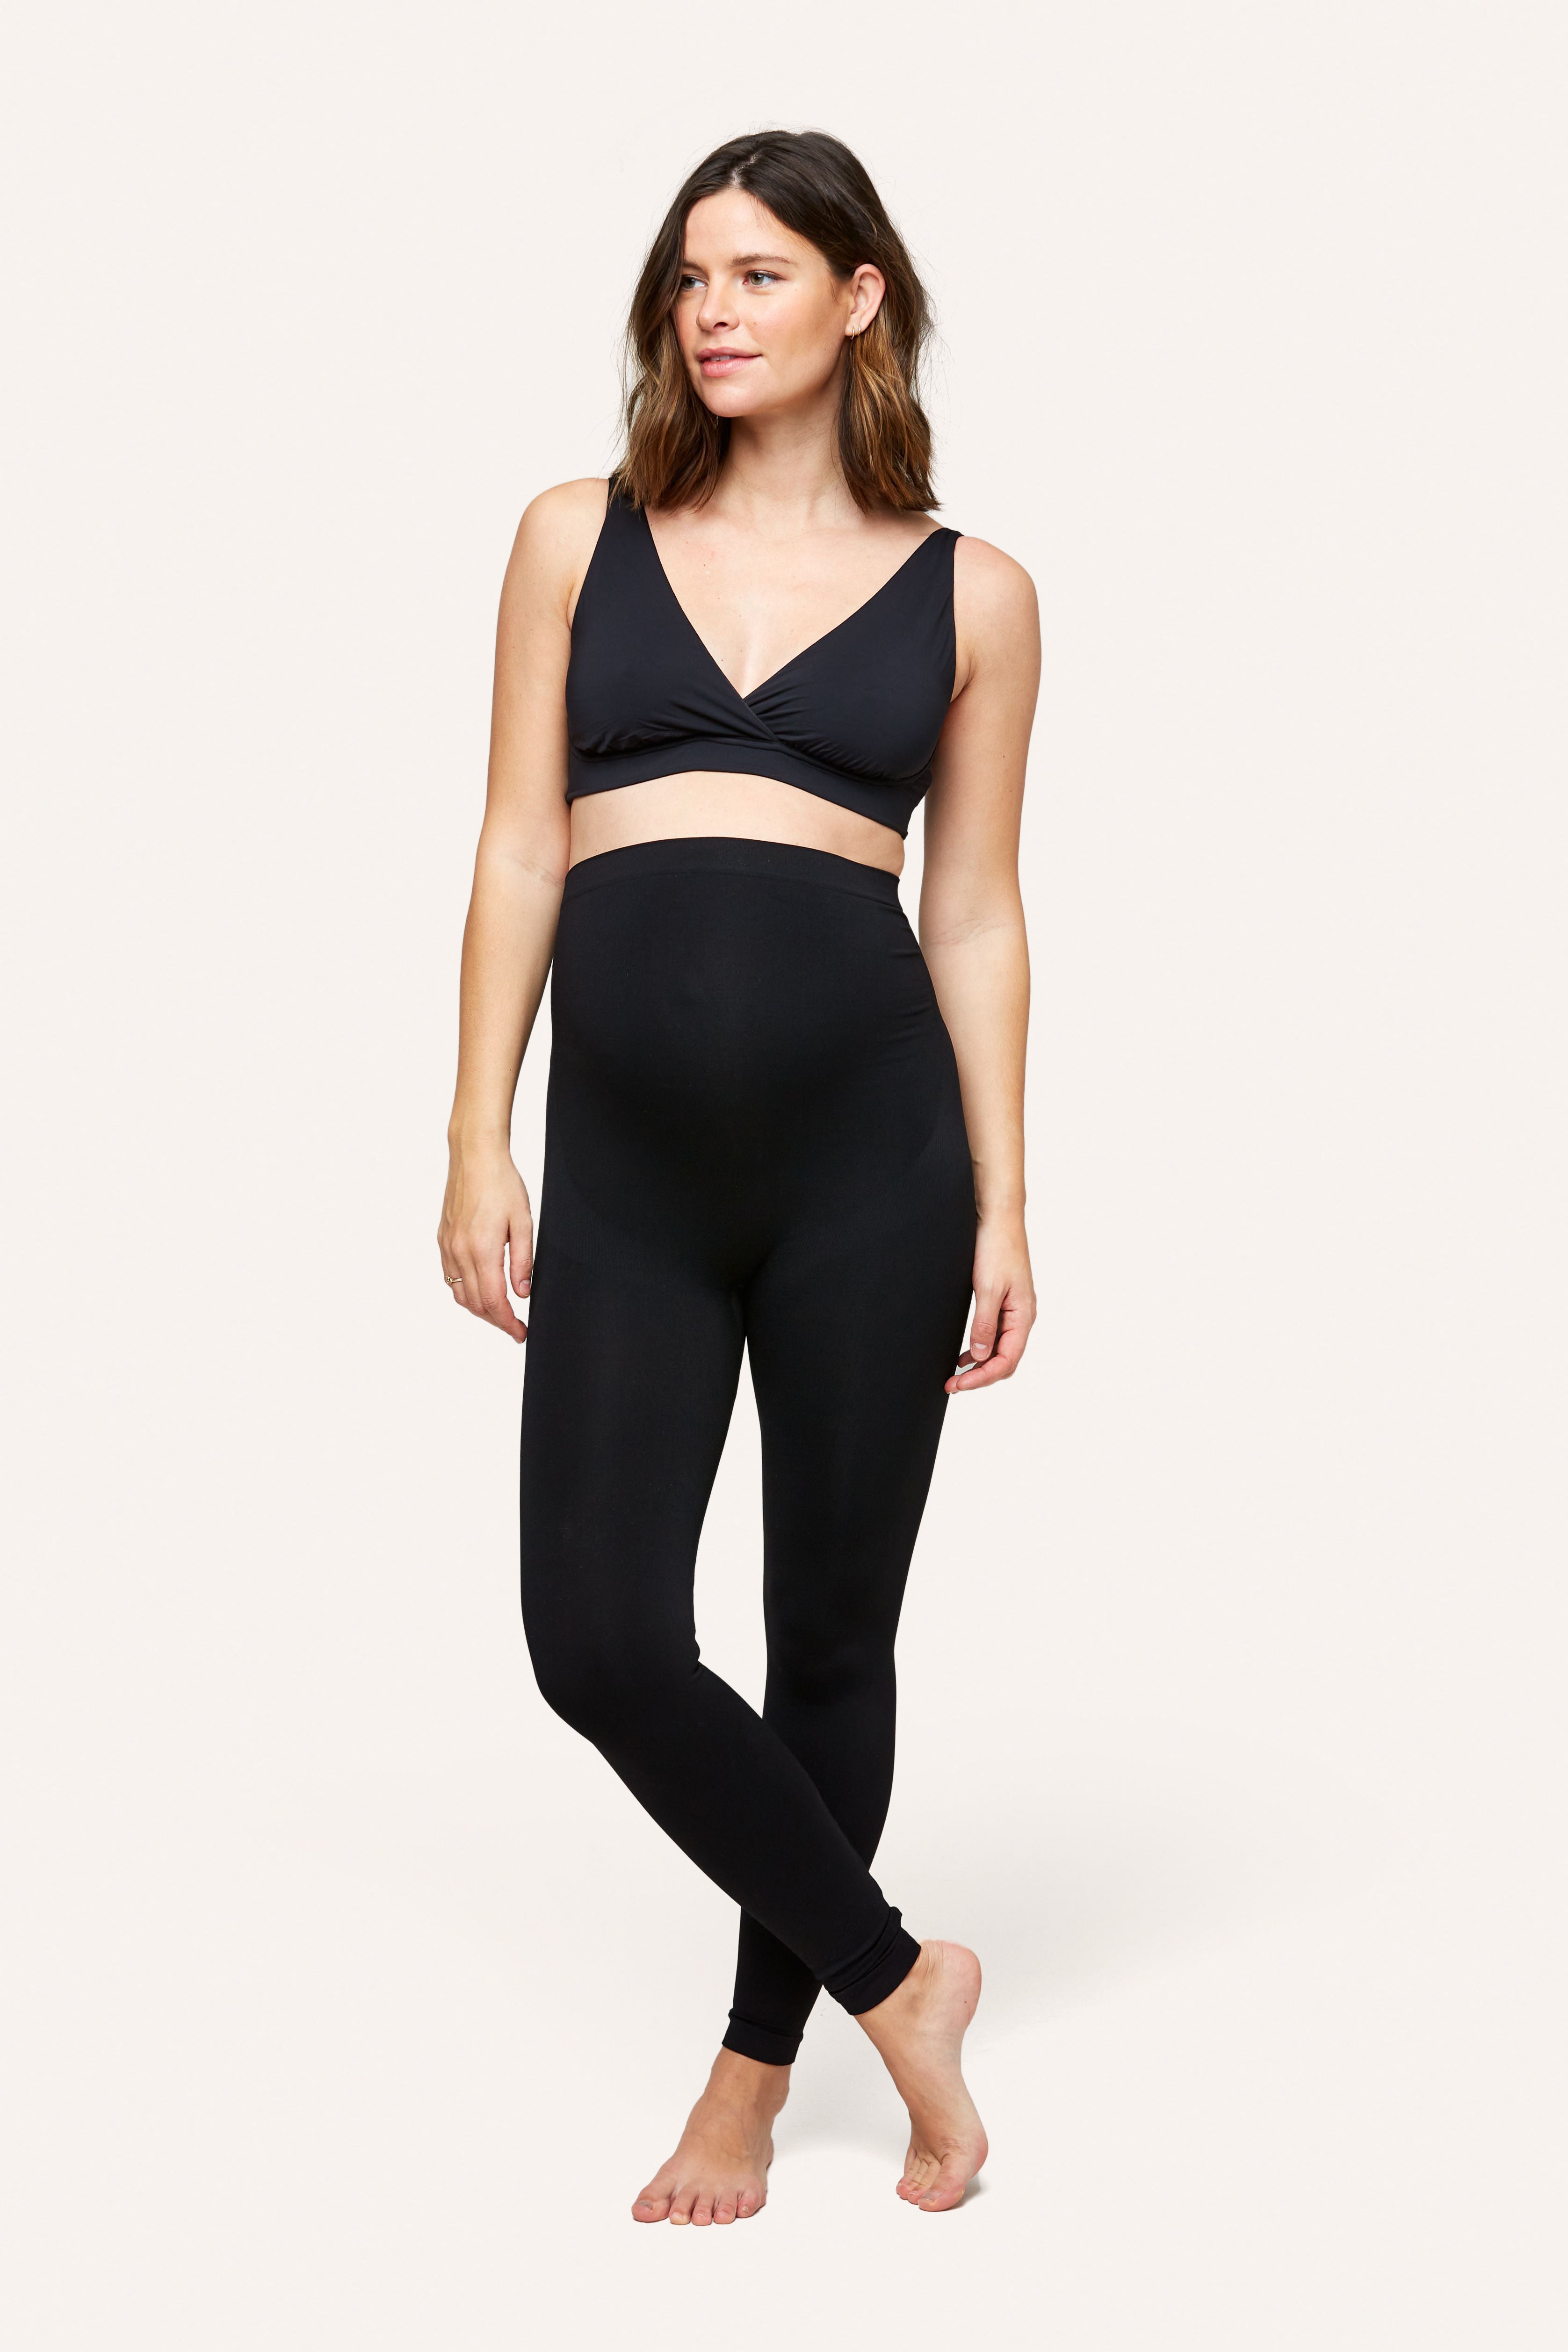 Hey Mama Maternity Leggings - Seamless, Supportive, Comfortable, Durability  and Style All in One - Be Comfortably Pregnant (Black, XS/S) : :  Clothing, Shoes & Accessories